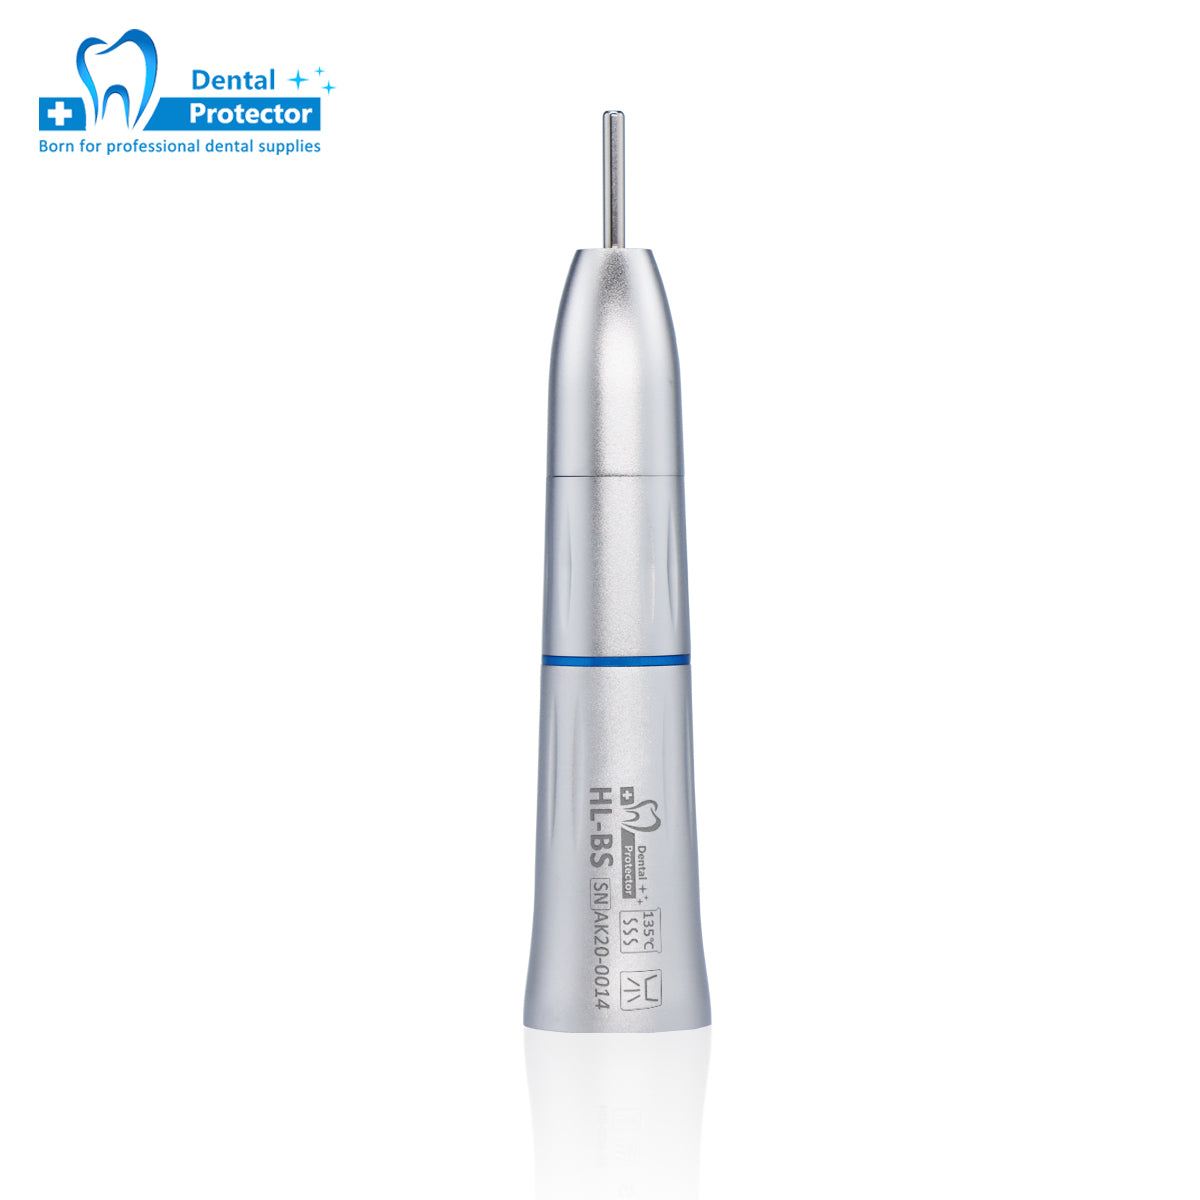 HL-BS Low Speed Straight Head Dental Handpiece With Cooling and Cleaning Functions